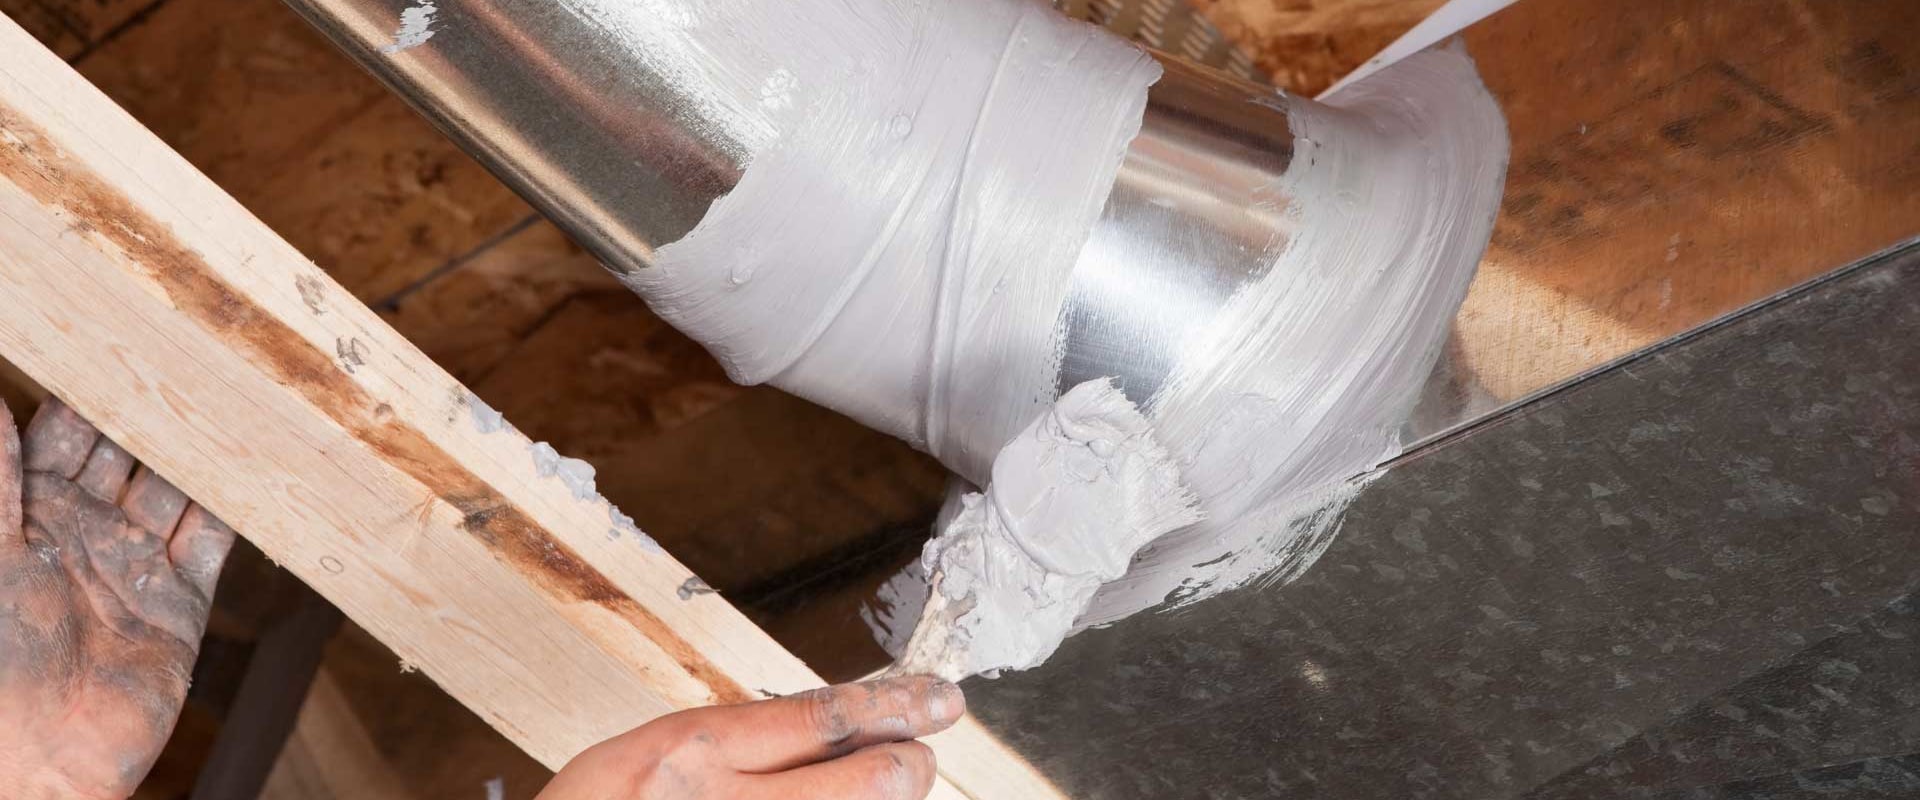 How to Find a Reputable Air Duct Sealing Company Near You